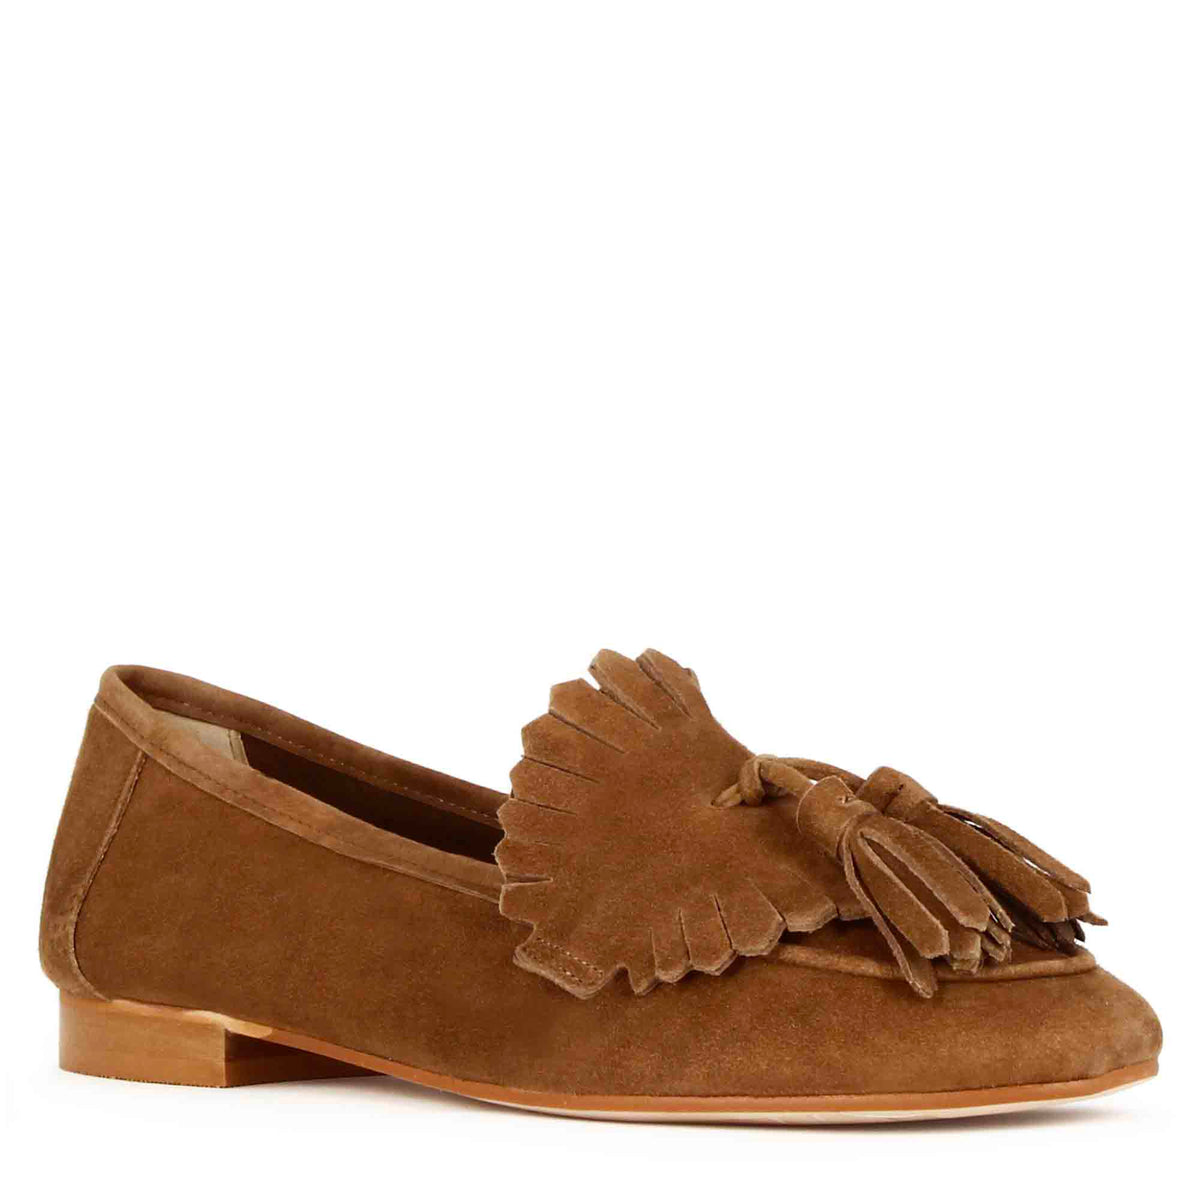 Classic women's moccasin in suede with brown tassels